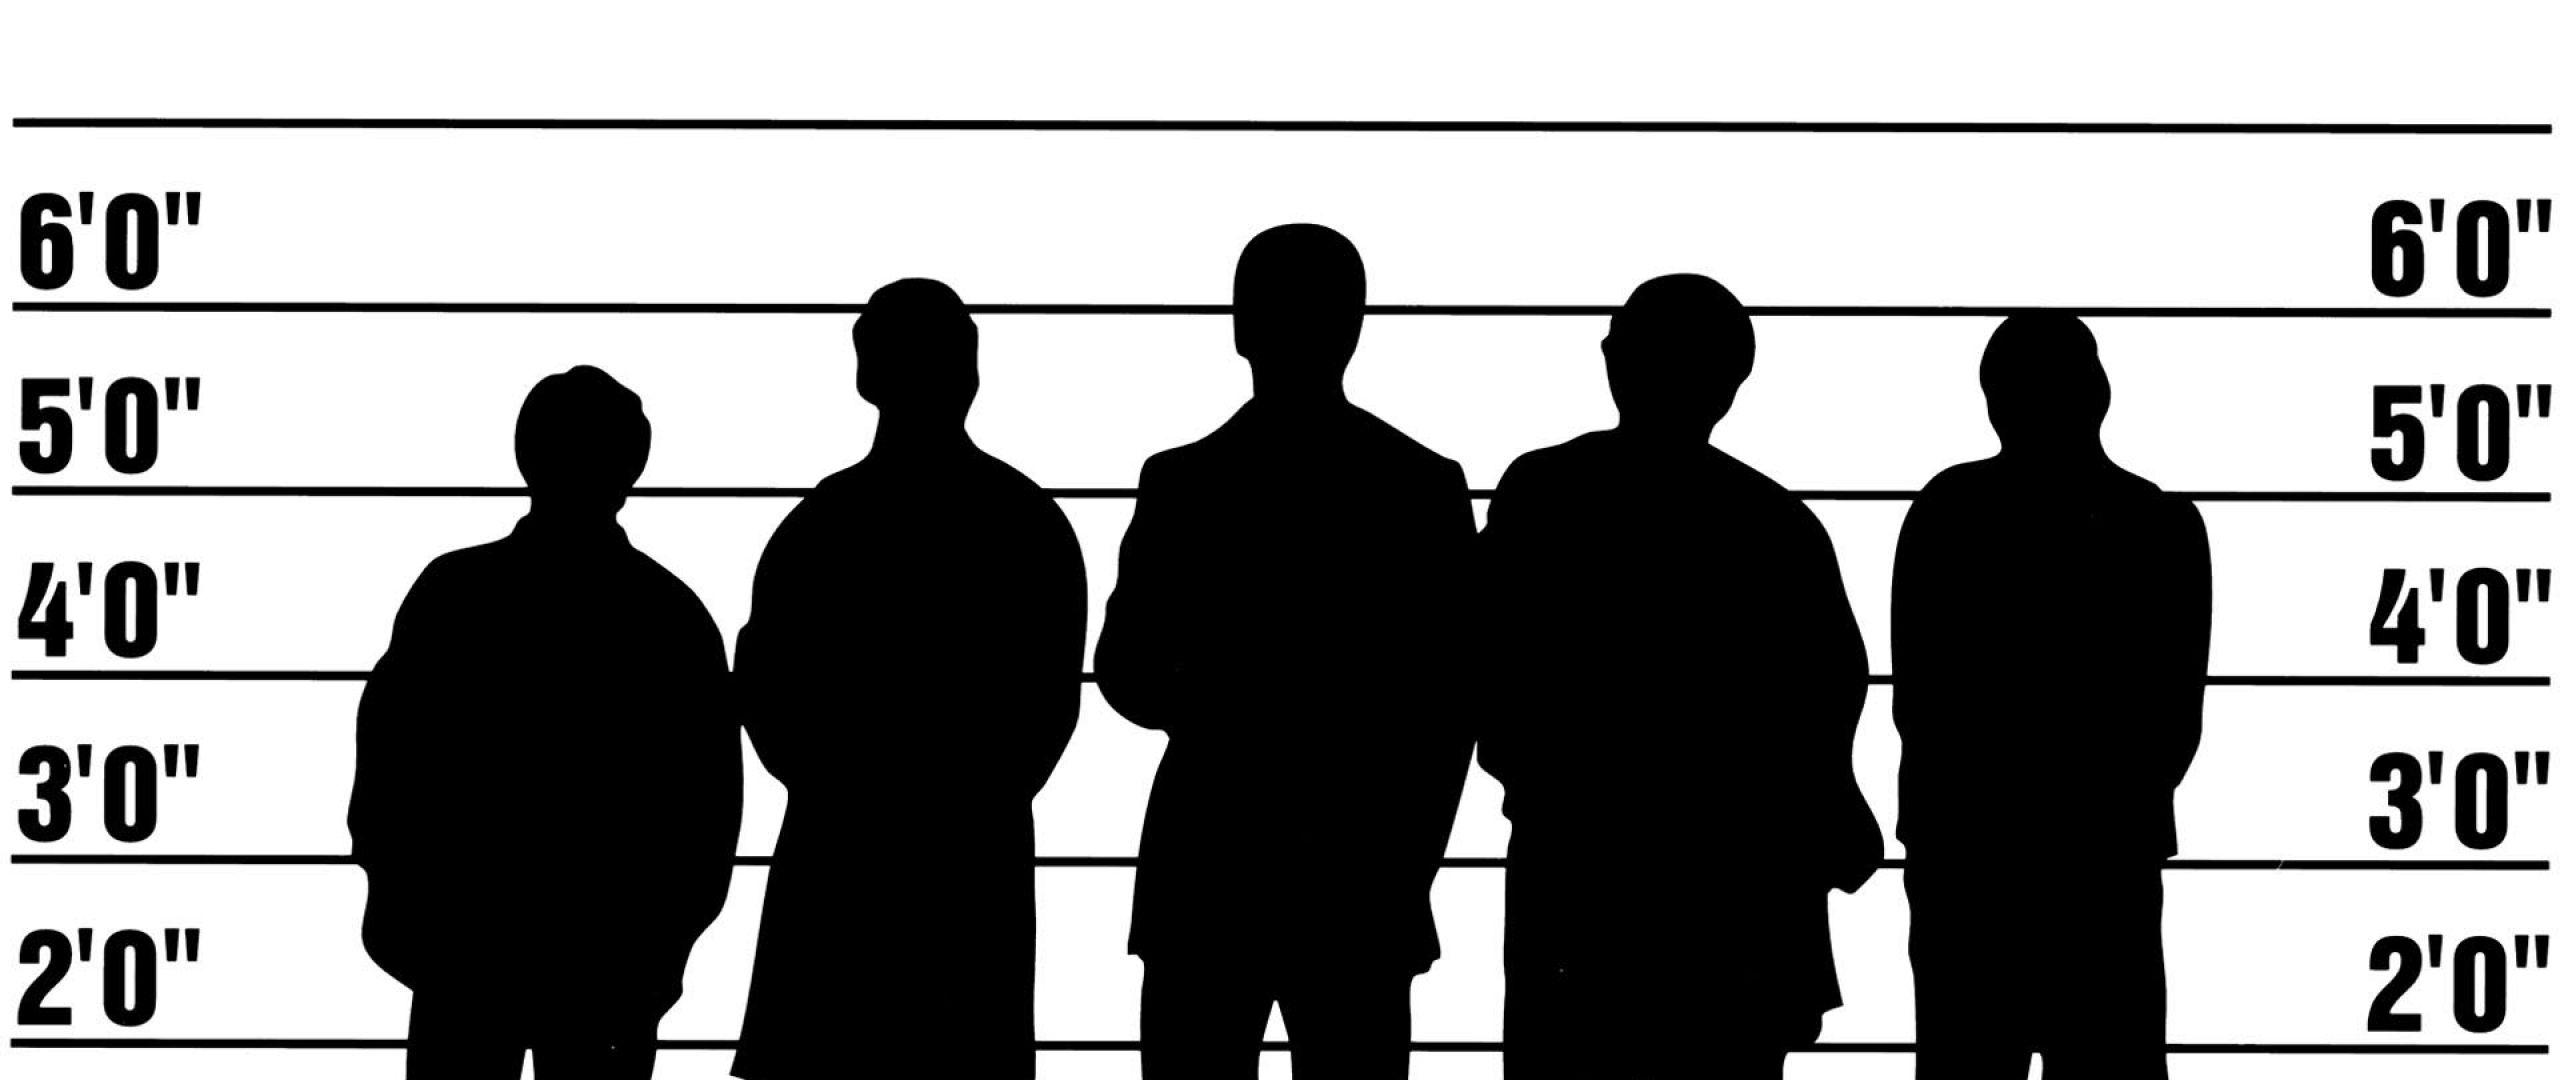 Download Wallpaper 2560x1080 The usual suspects, Stephen